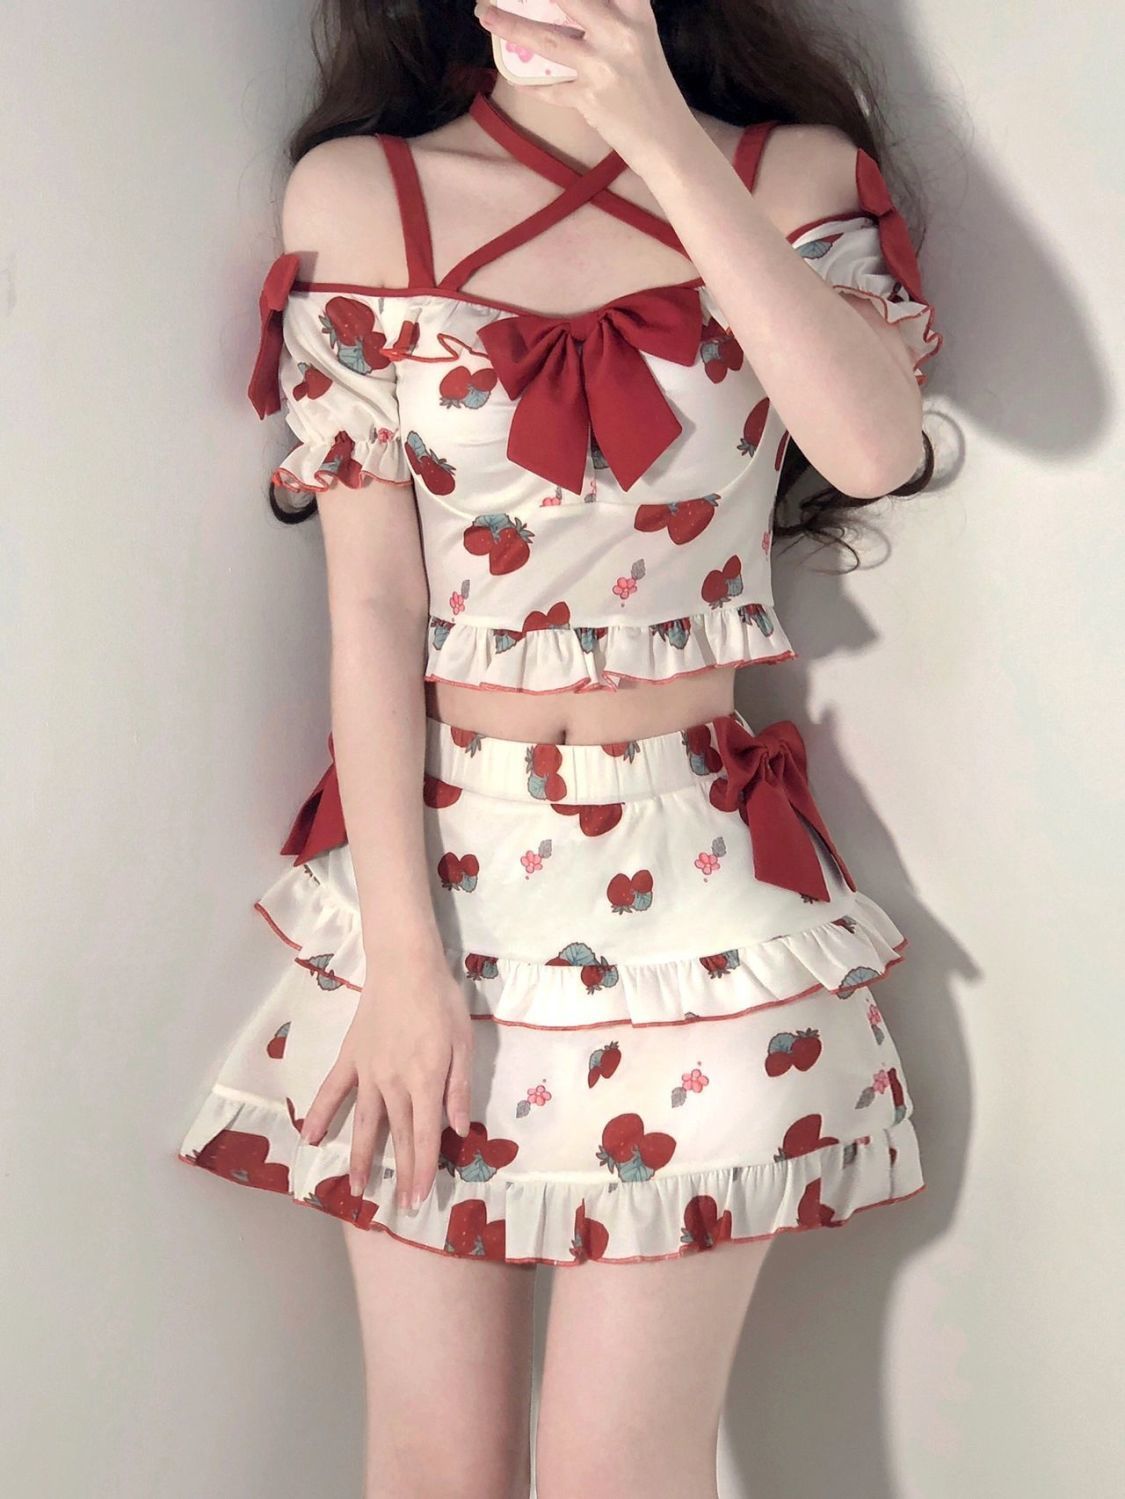 Strawberry Bow Skirt Suit Susan